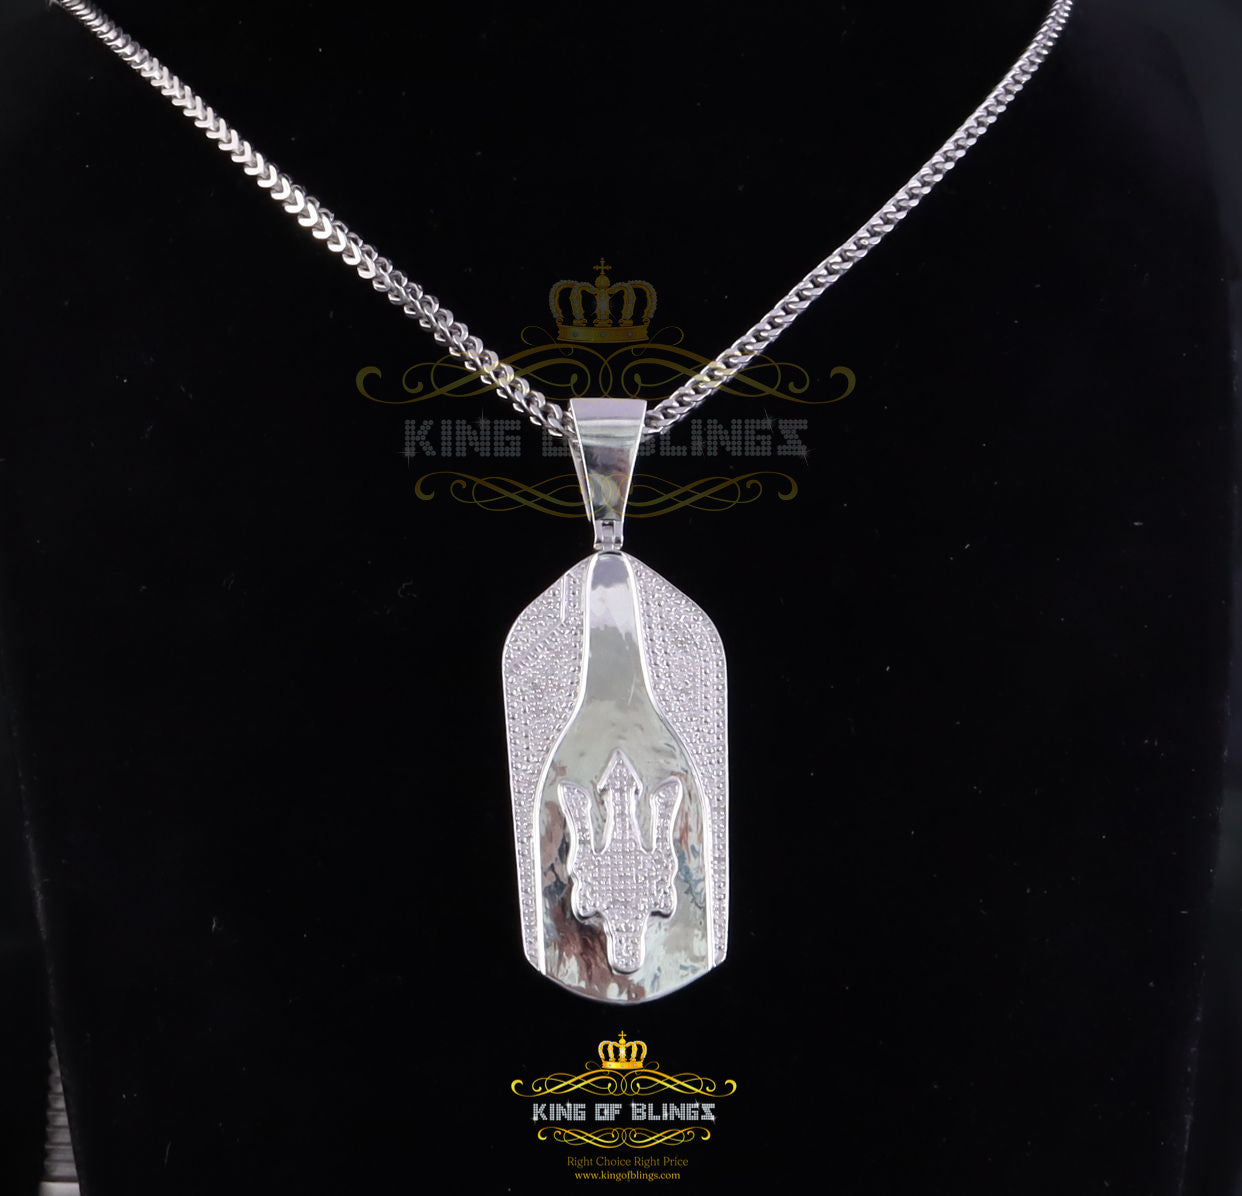 King Of Bling's New Real 0.33ct Diamond Silver Trident White Charm Fashion Necklace Pendant KING OF BLINGS